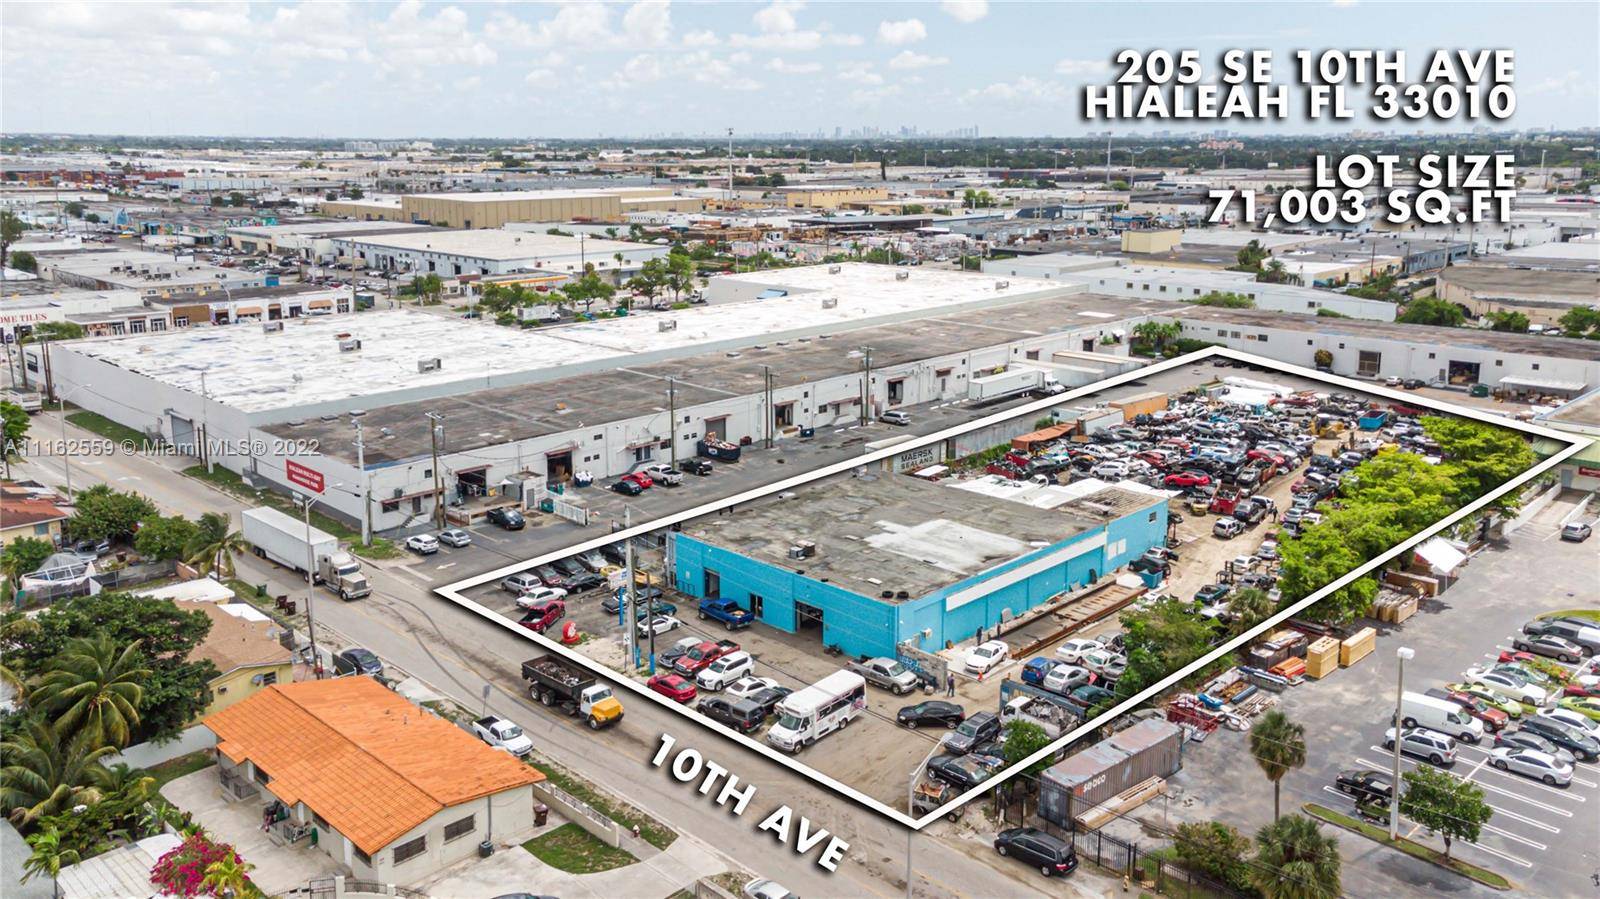 One story industrial warehouse large land located in the heart of Hialeah, Florida.